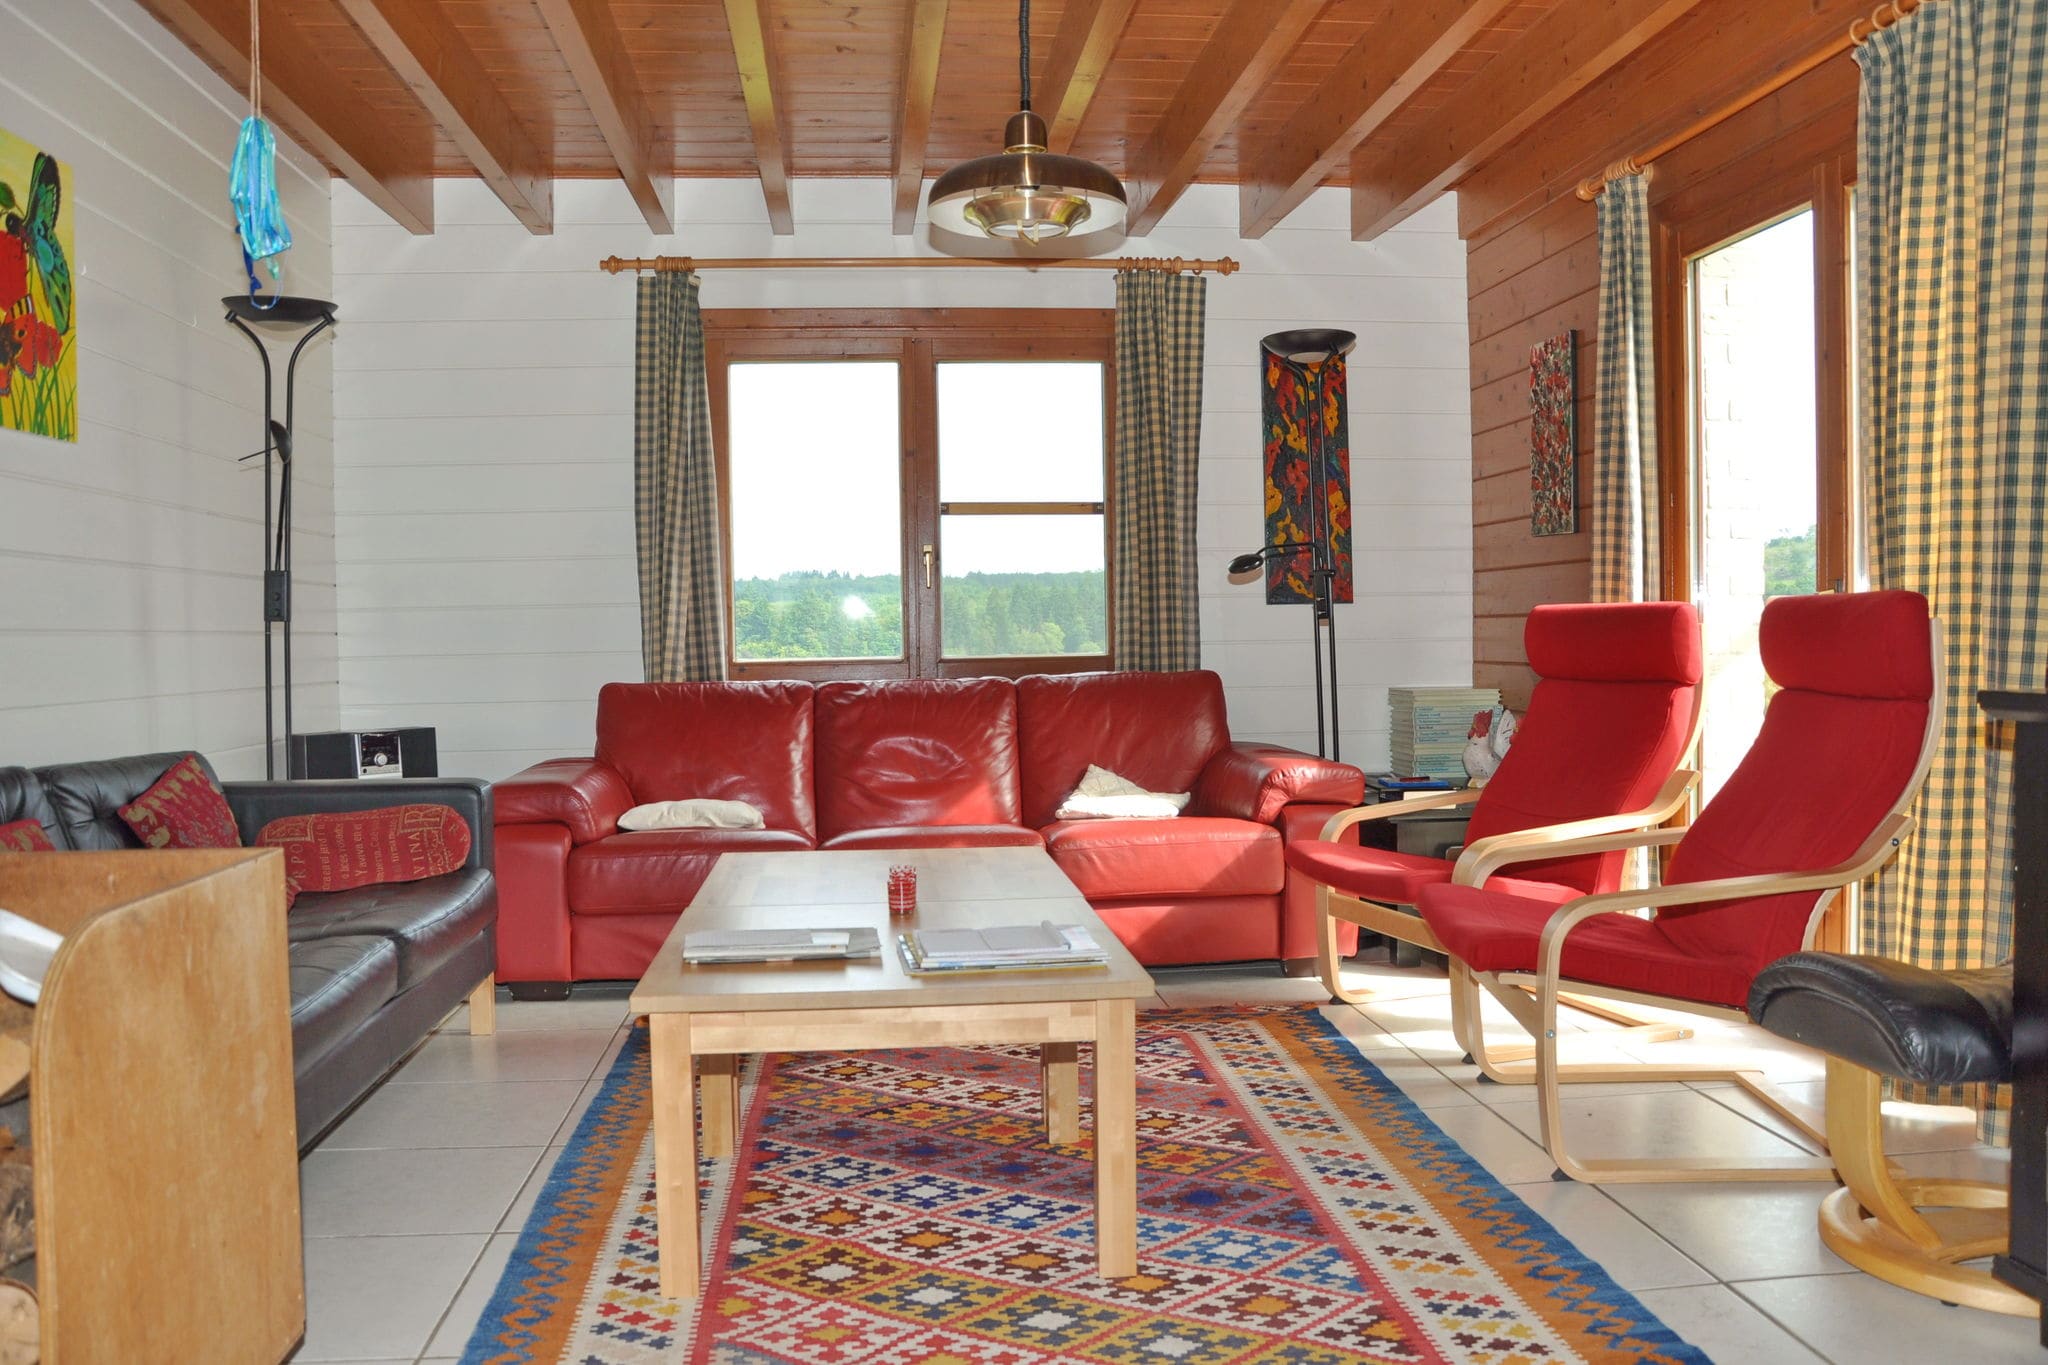 Chalet just outside Hampteau offering magnificent views across the Ourthe valley